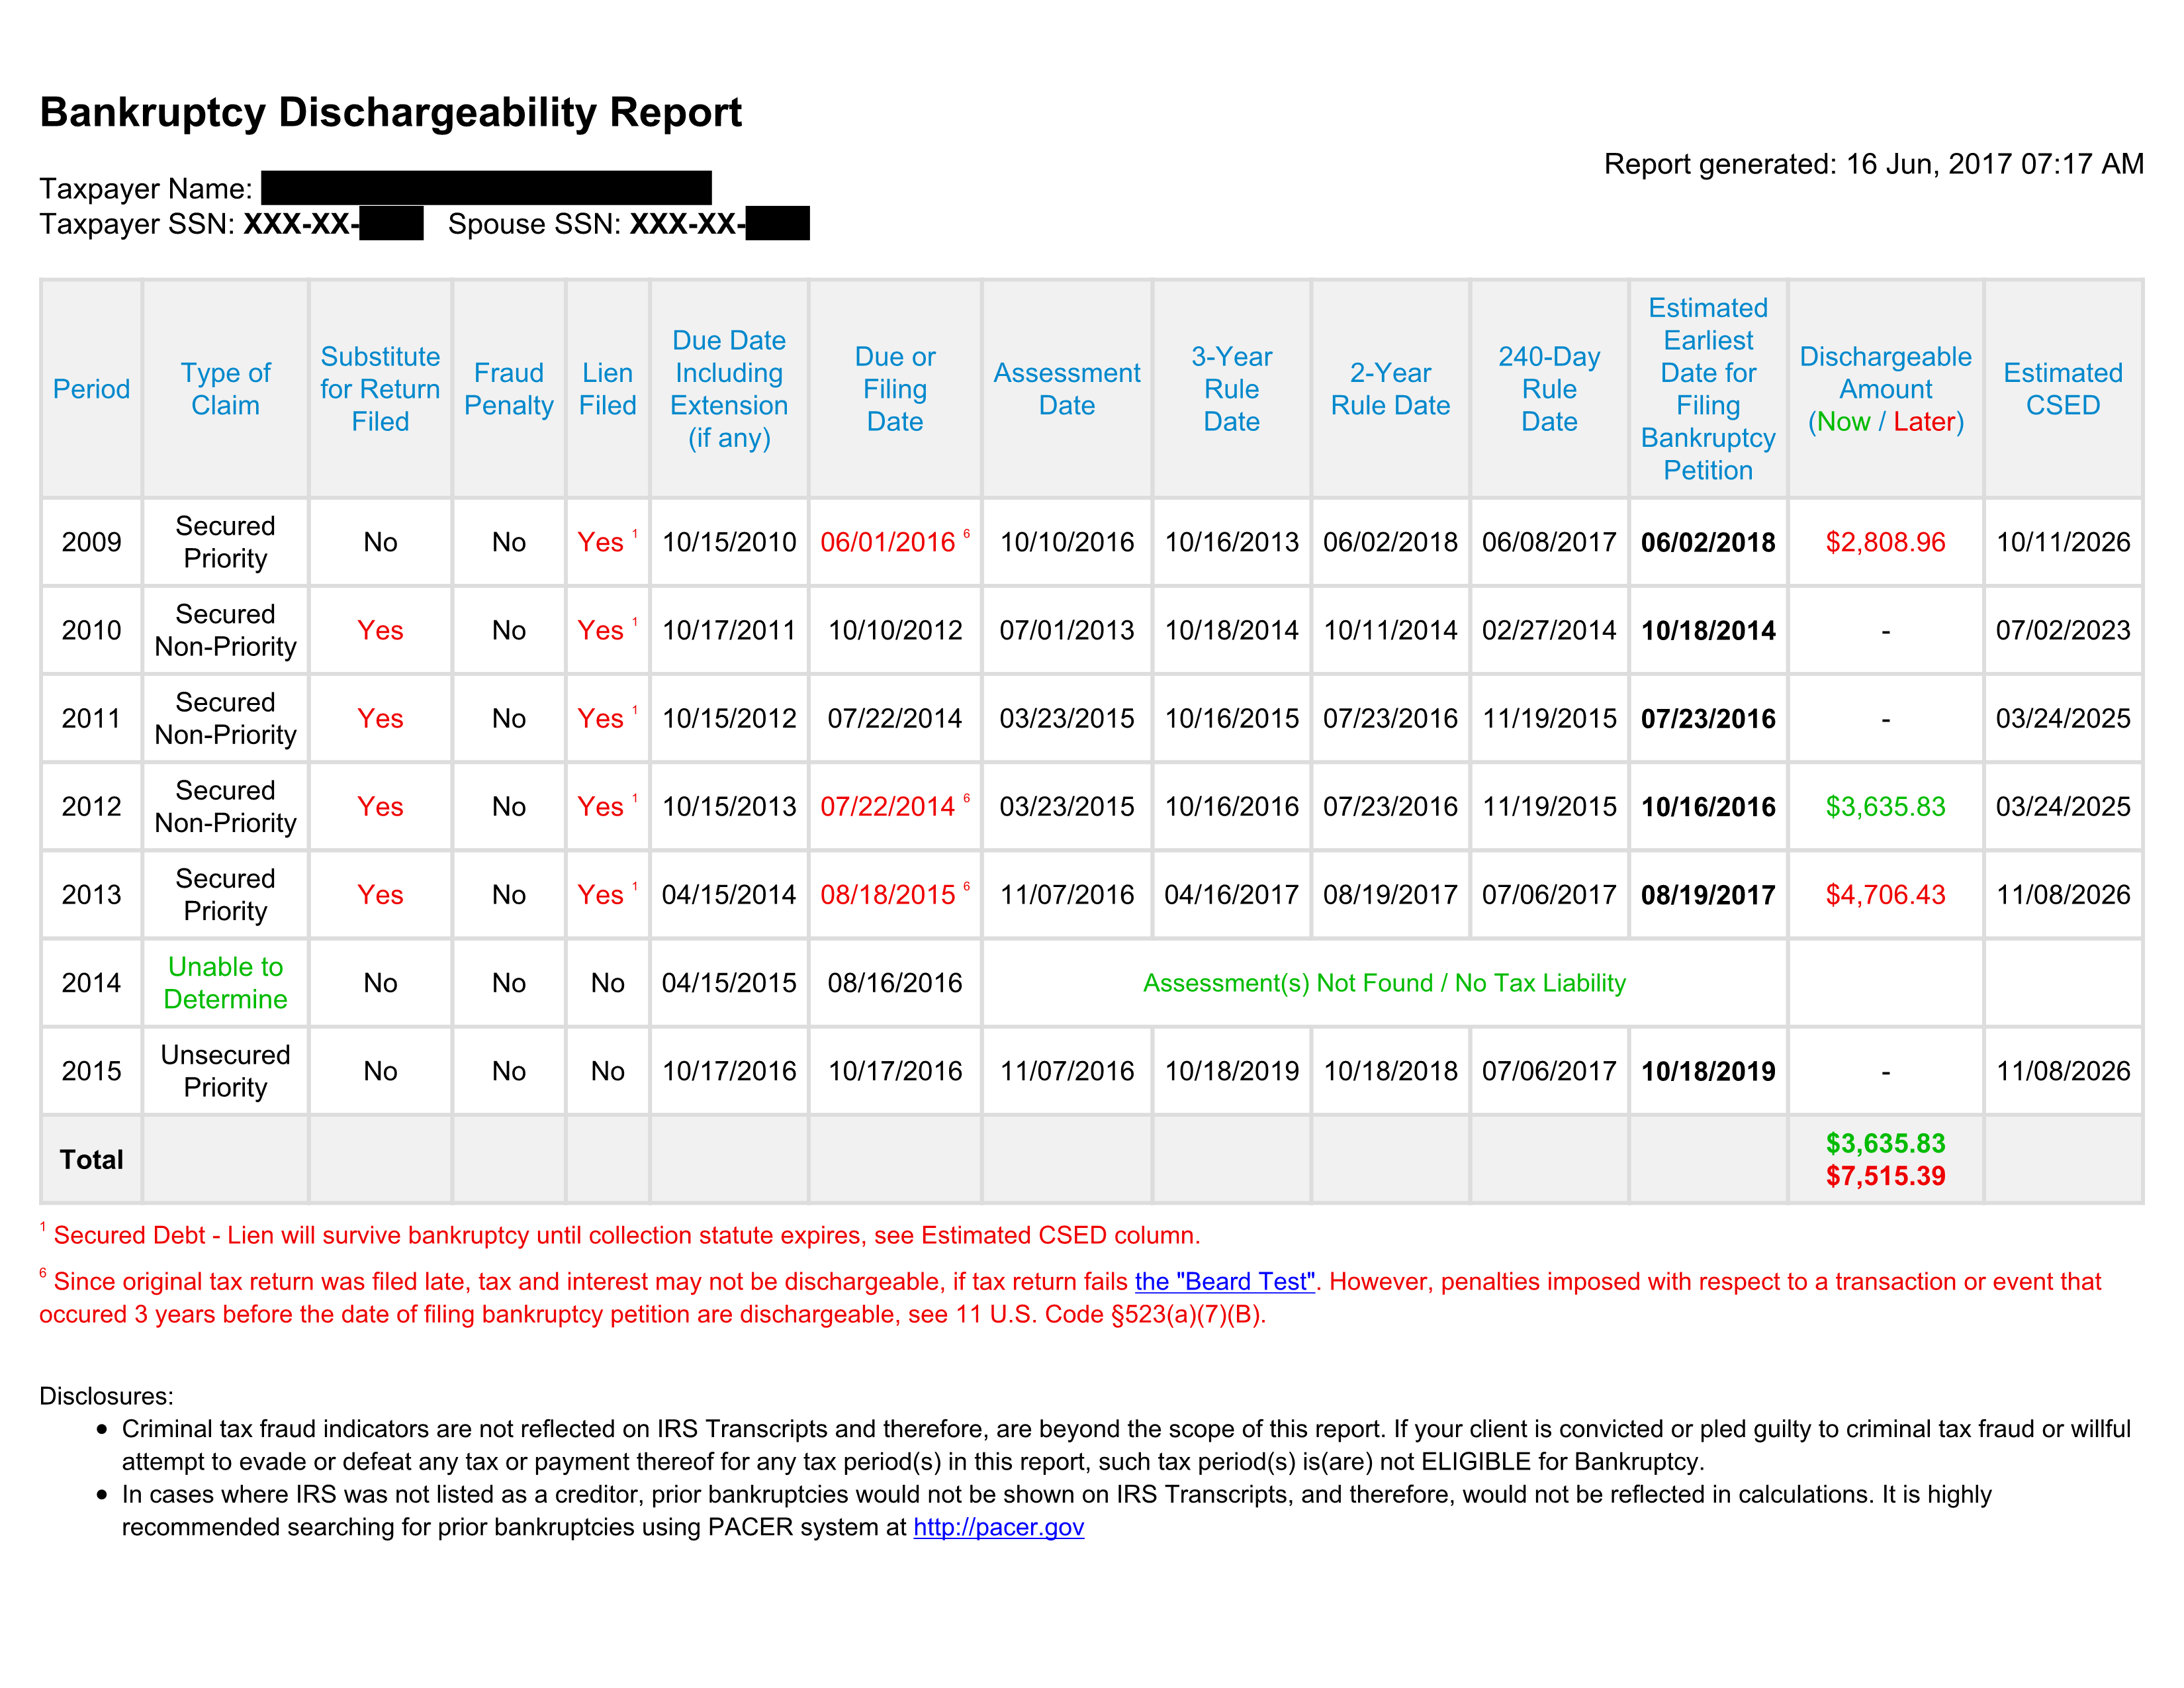 Image: Sample Bankruptcy Dischargeability Analysis used to determine if you can discharge taxes in bankrutpcy.